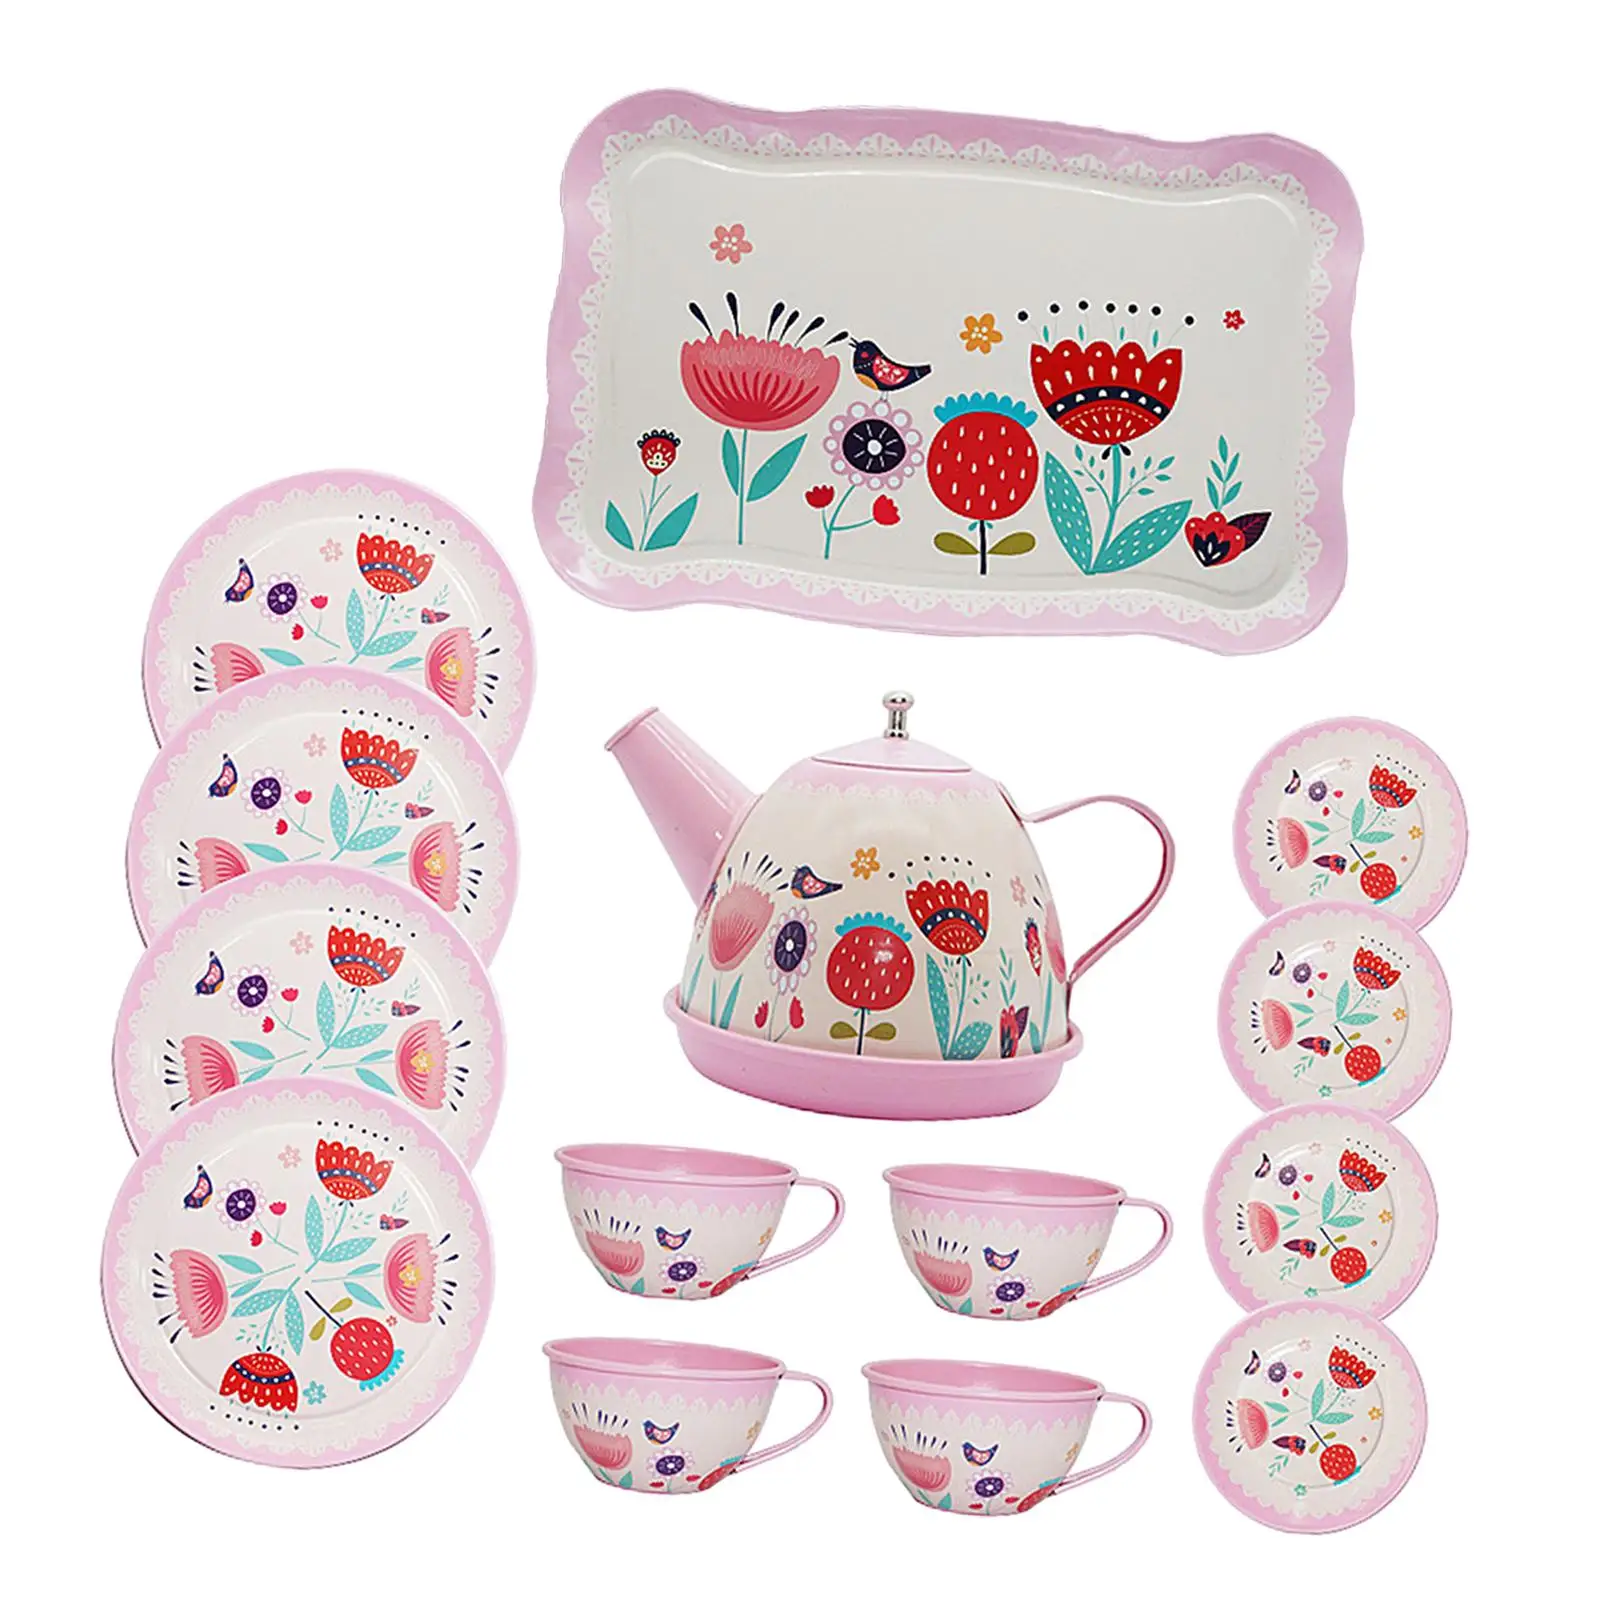 Kids Tea Set for Little Girls Pretend Toy Educational with Metal Teapots Cups Plates Tea Party Set for Kids Children Age 3 4 5 6